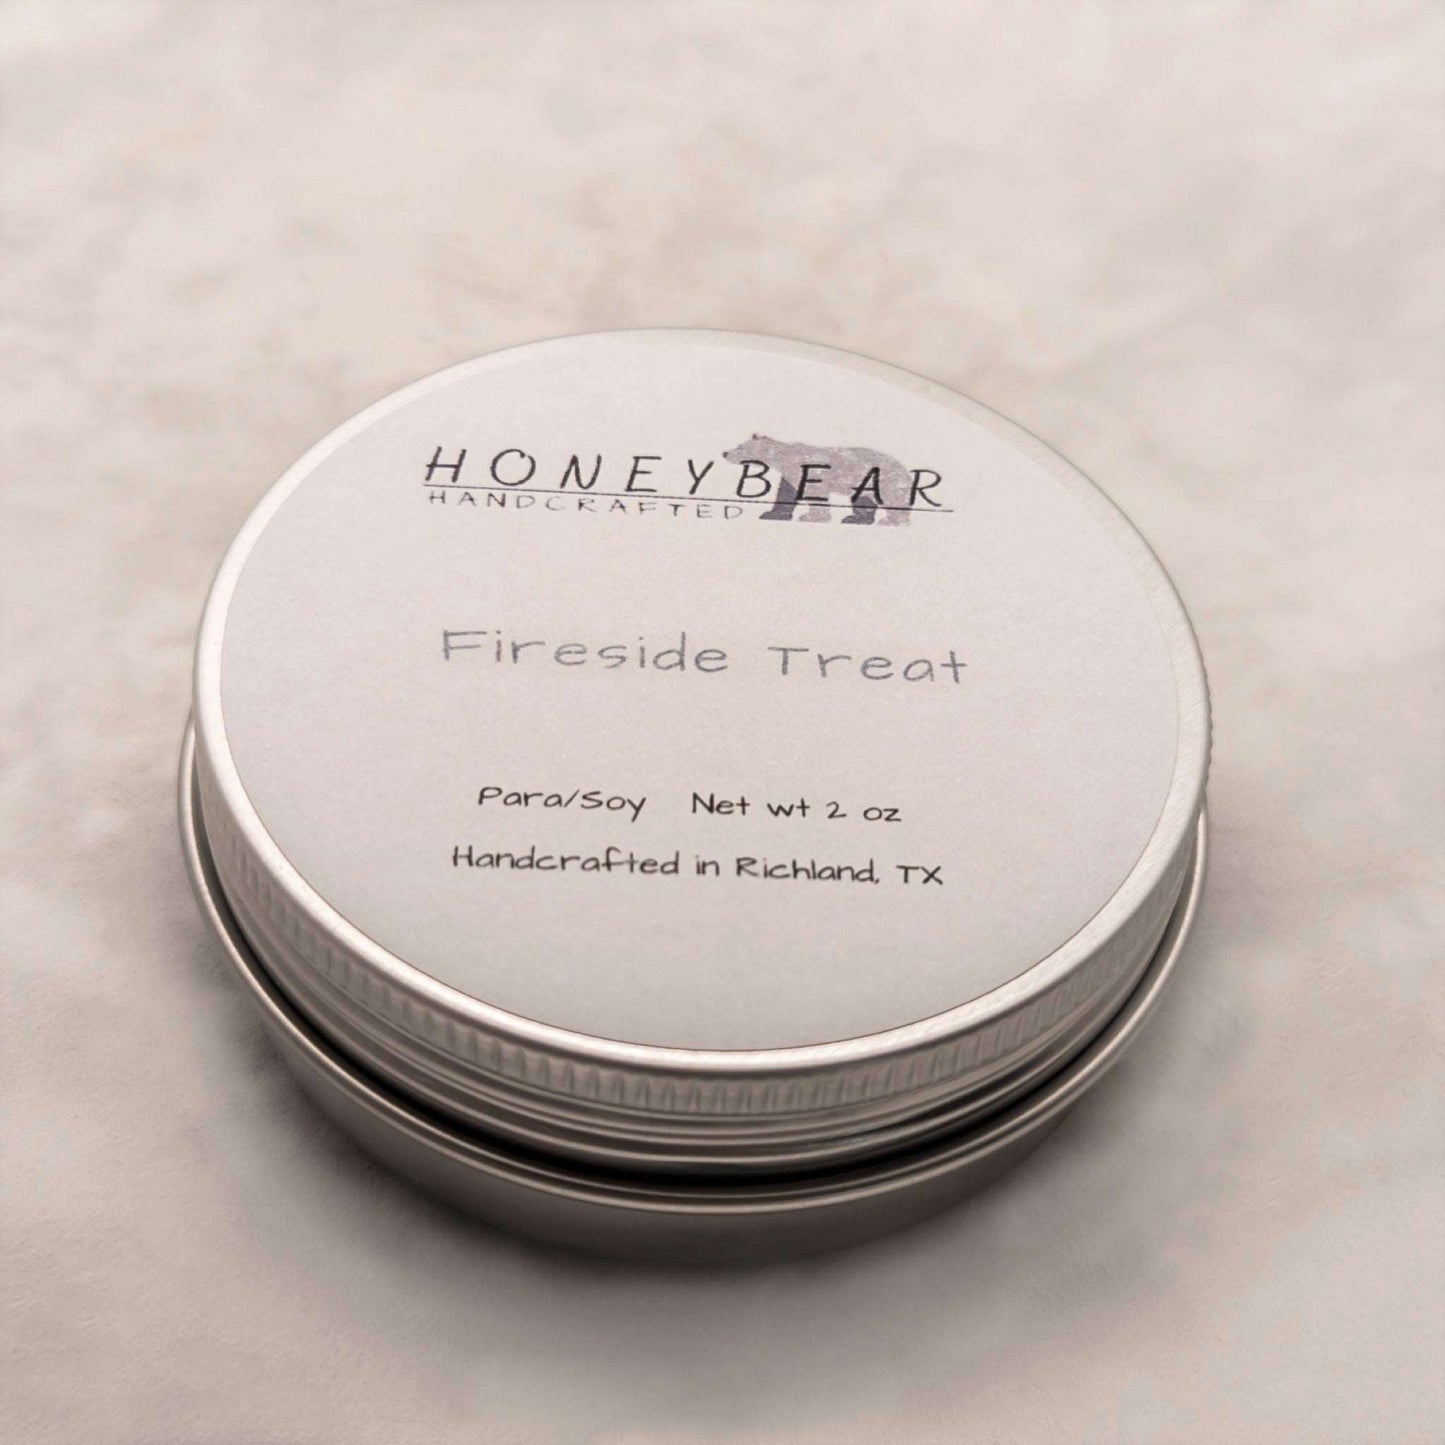 image of 2 oz travel or sample size candle labeled Fireside Treat on a white background